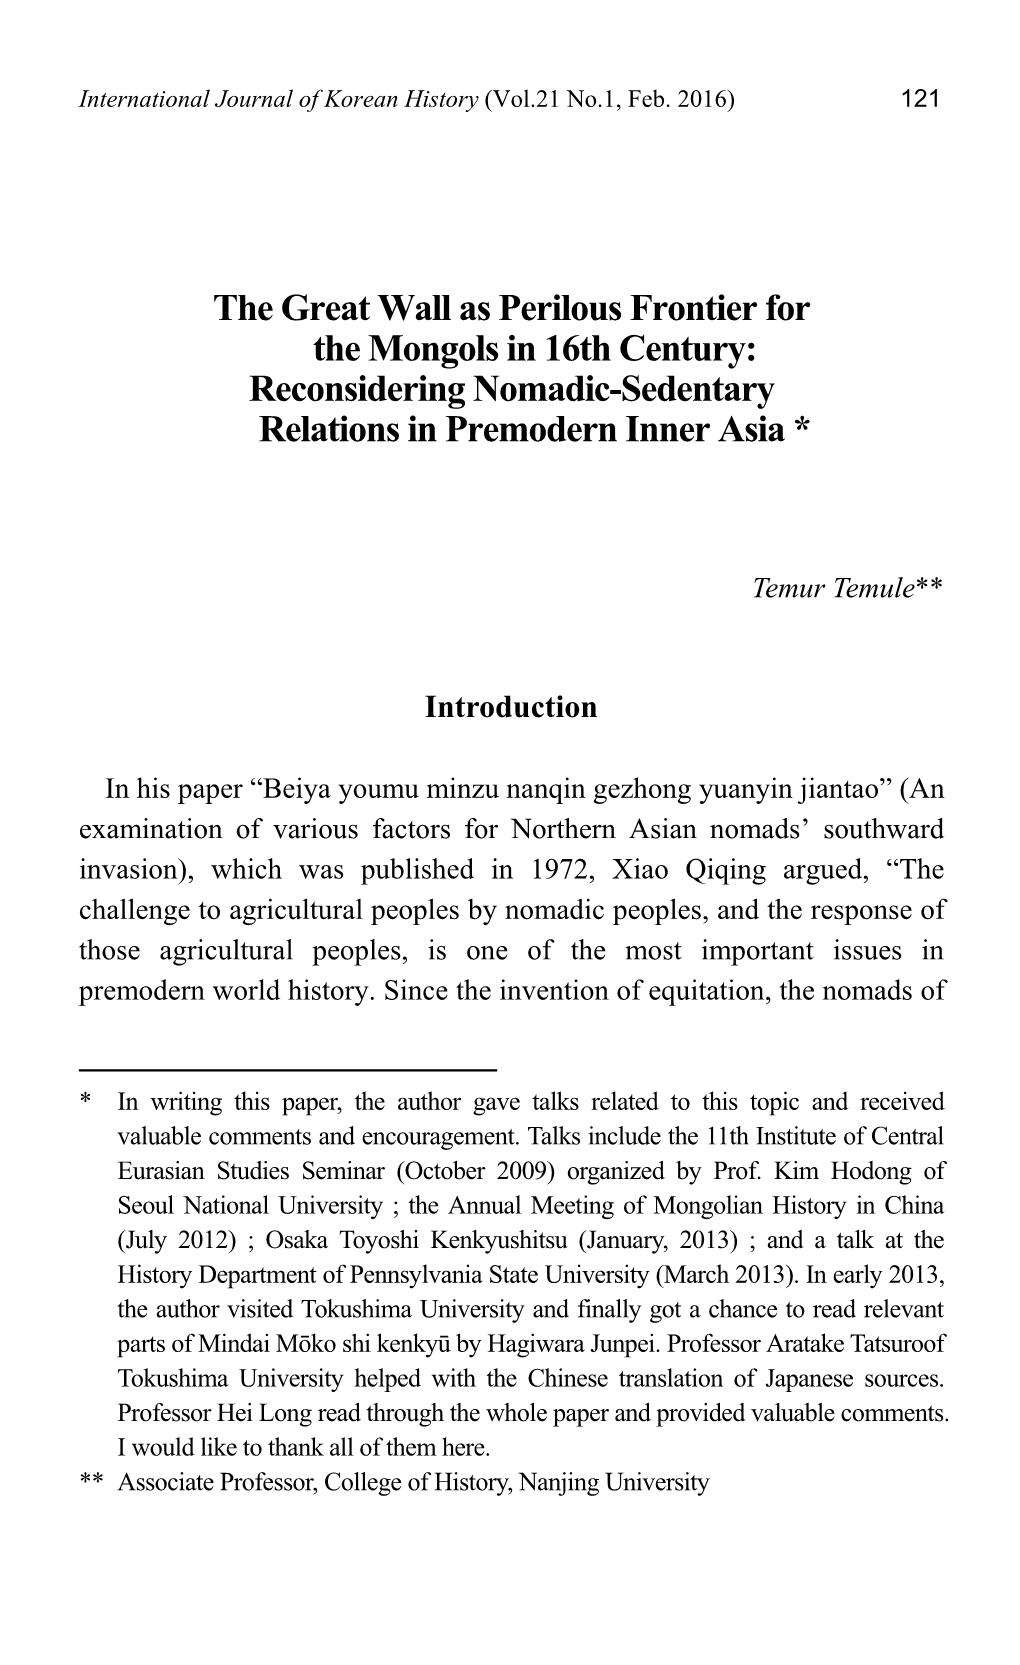 The Great Wall As Perilous Frontier for the Mongols in 16Th Century: Reconsidering Nomadic-Sedentary Relations in Premodern Inner Asia *